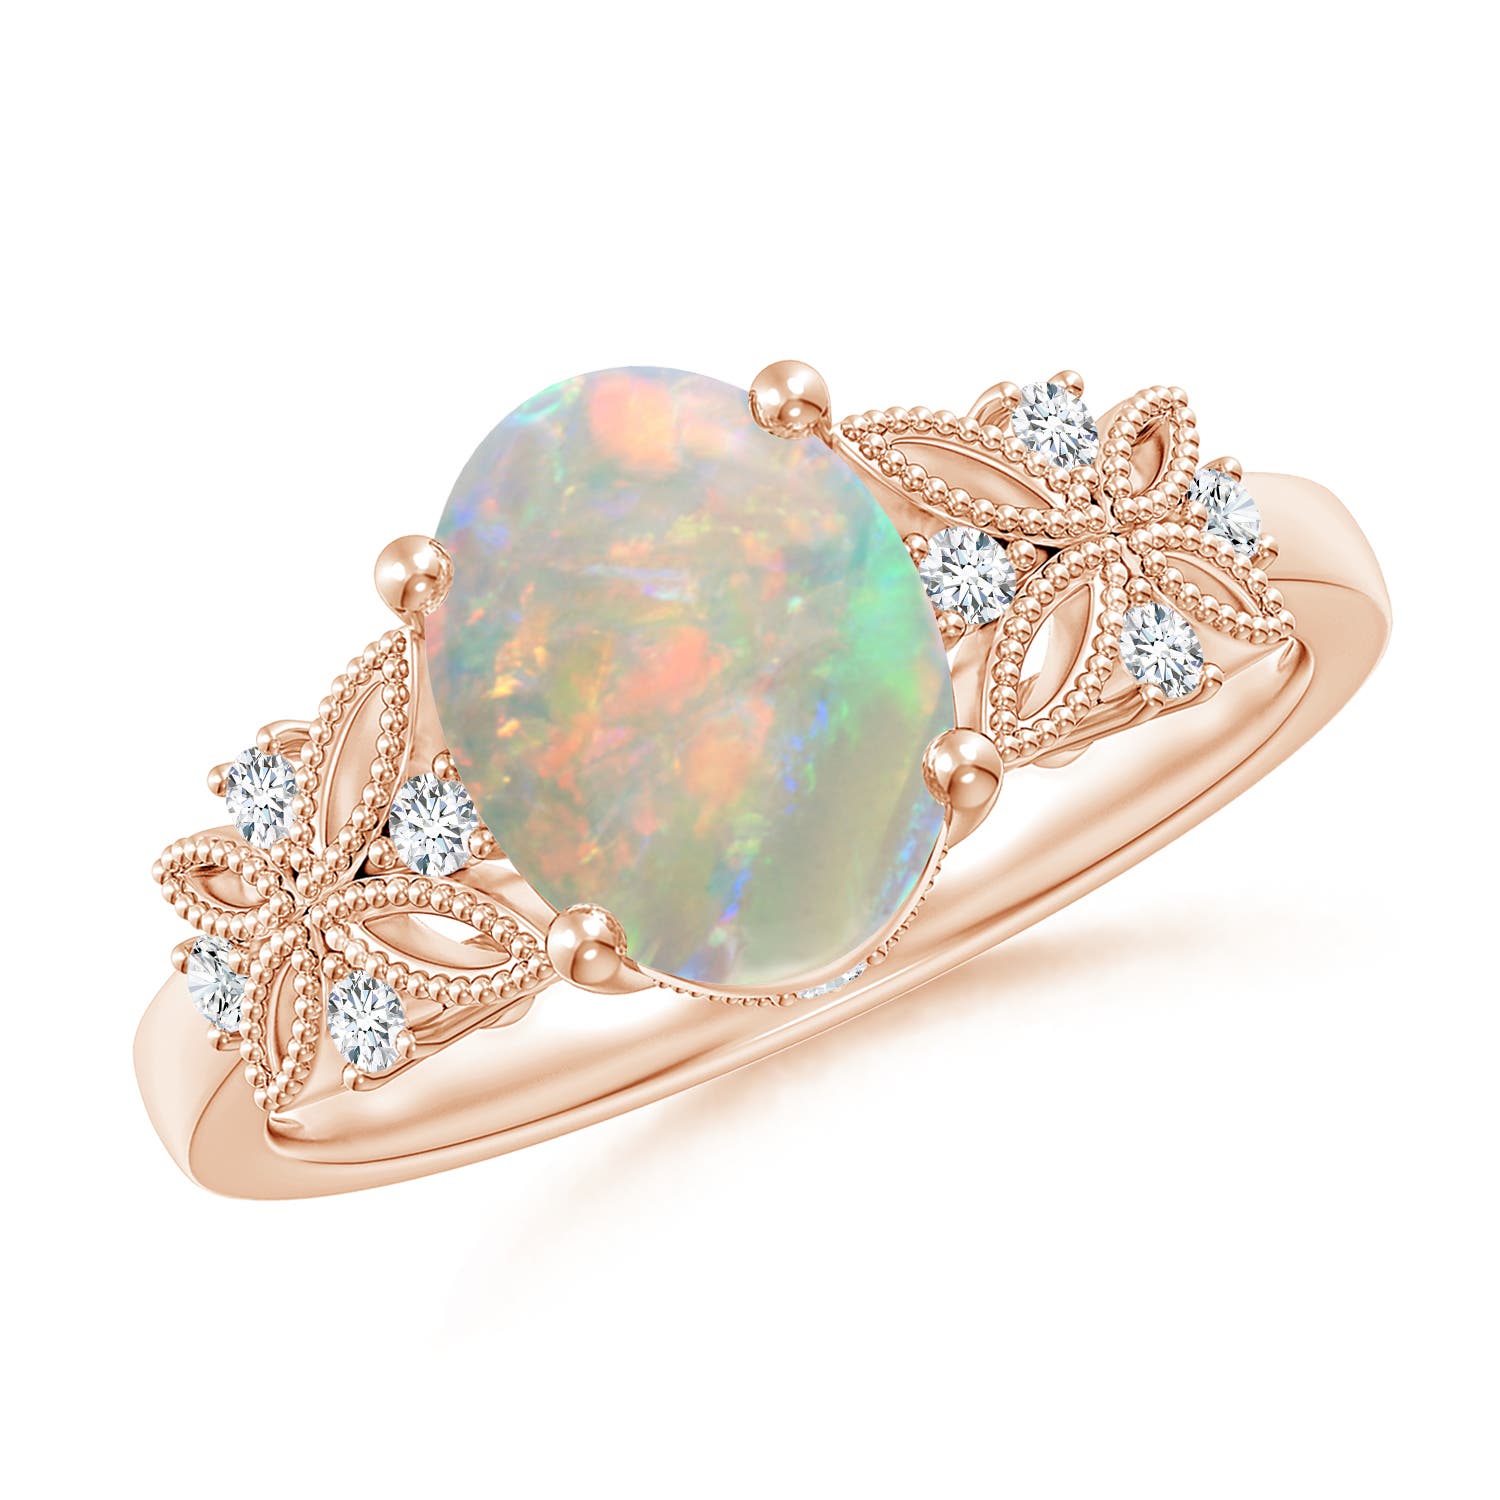 Vintage Style Oval Opal Ring with Diamonds | Angara